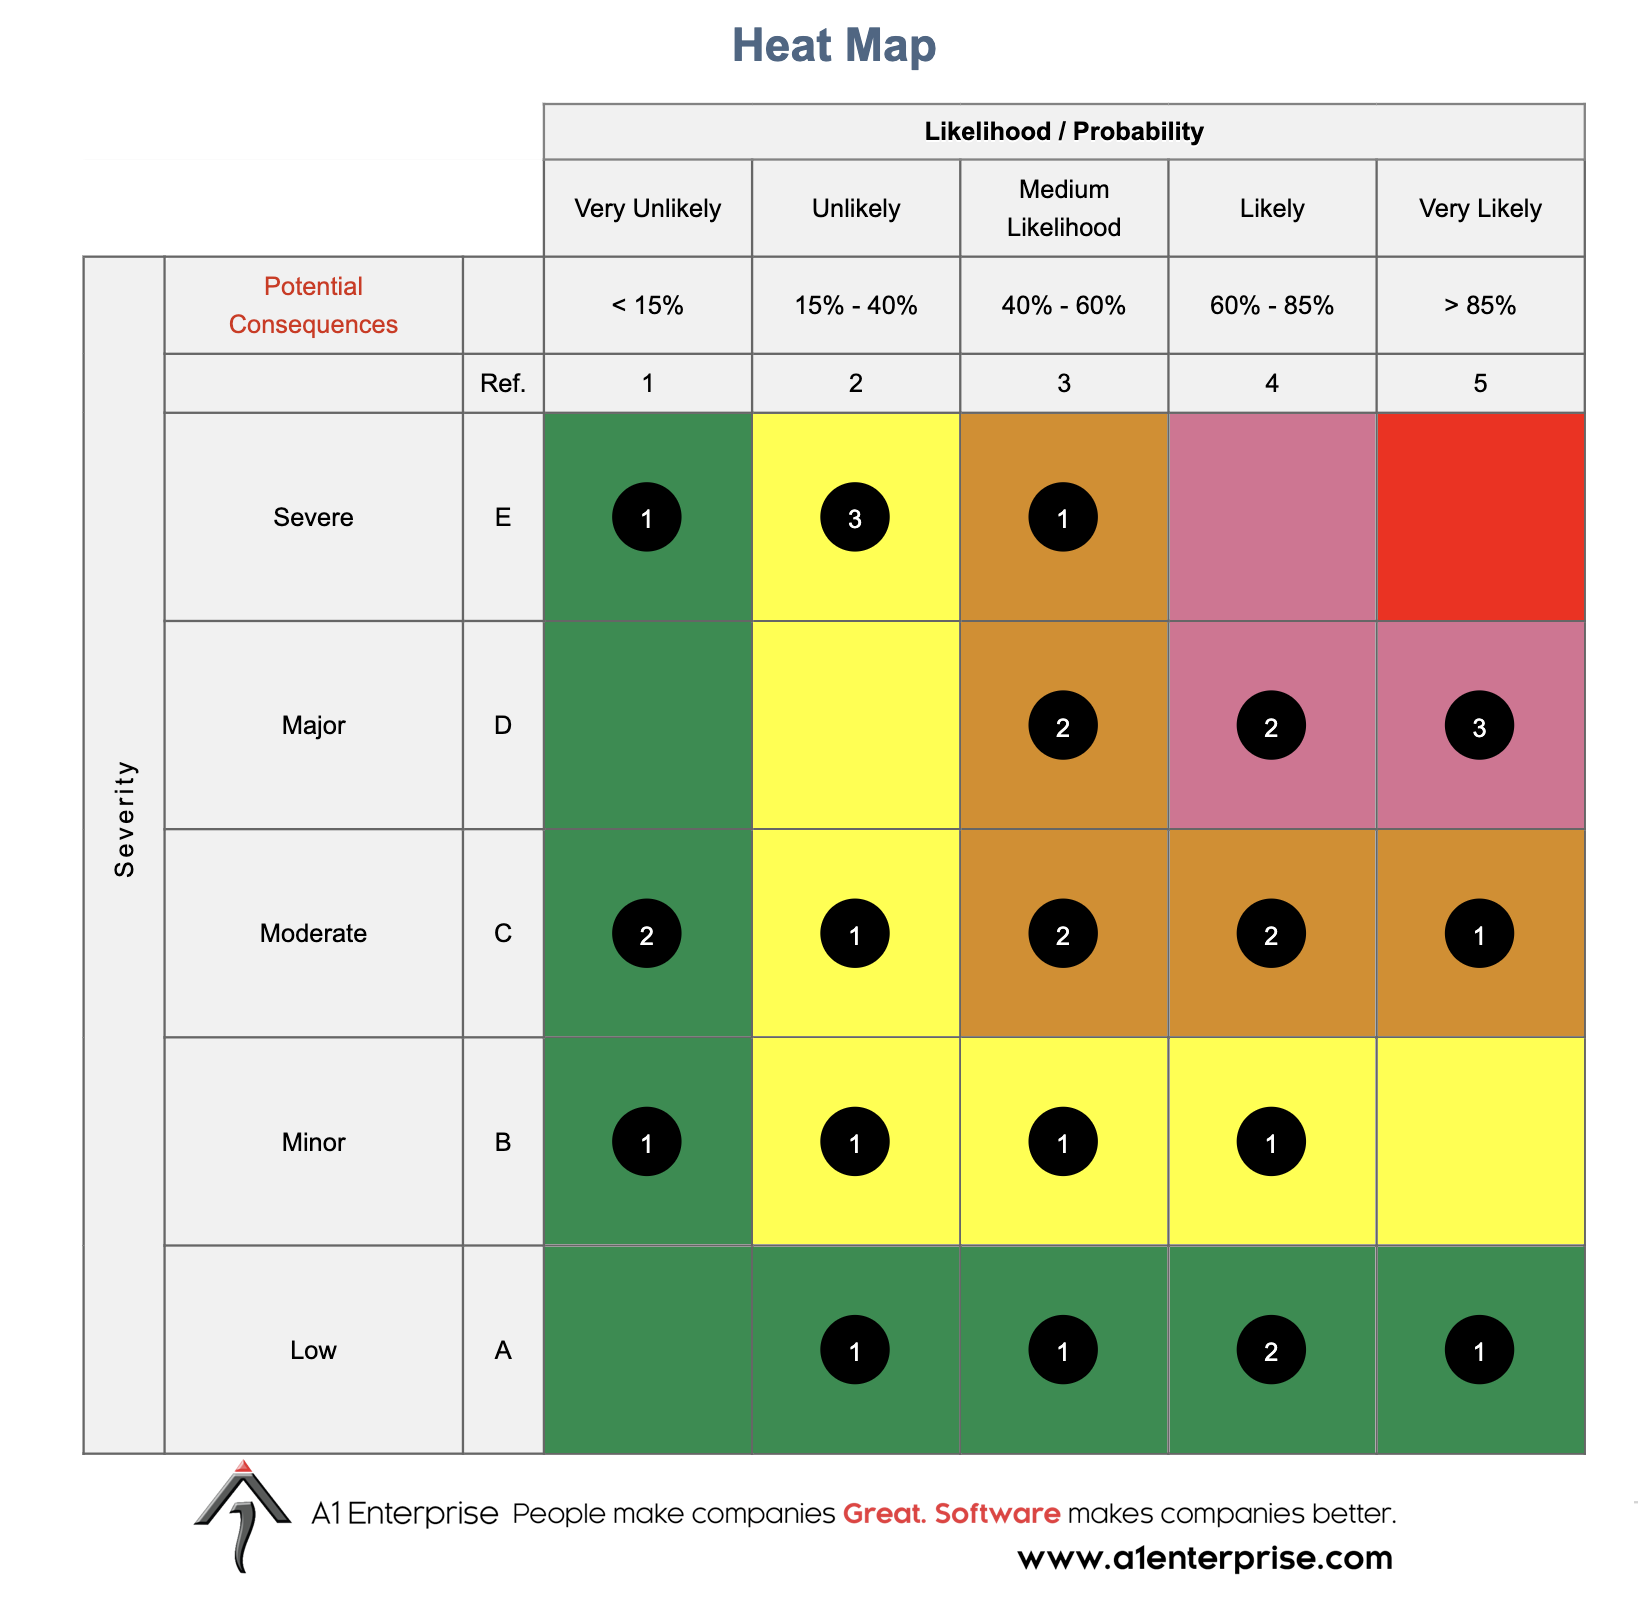 A1 Tracker Enterprise Risk Management Software ERM Heat Map. These analytics show how many risks are in each risk quadrant, allowing risk management teams to collaborate and prioritize what risks to focus on to protect people and assets of the company.